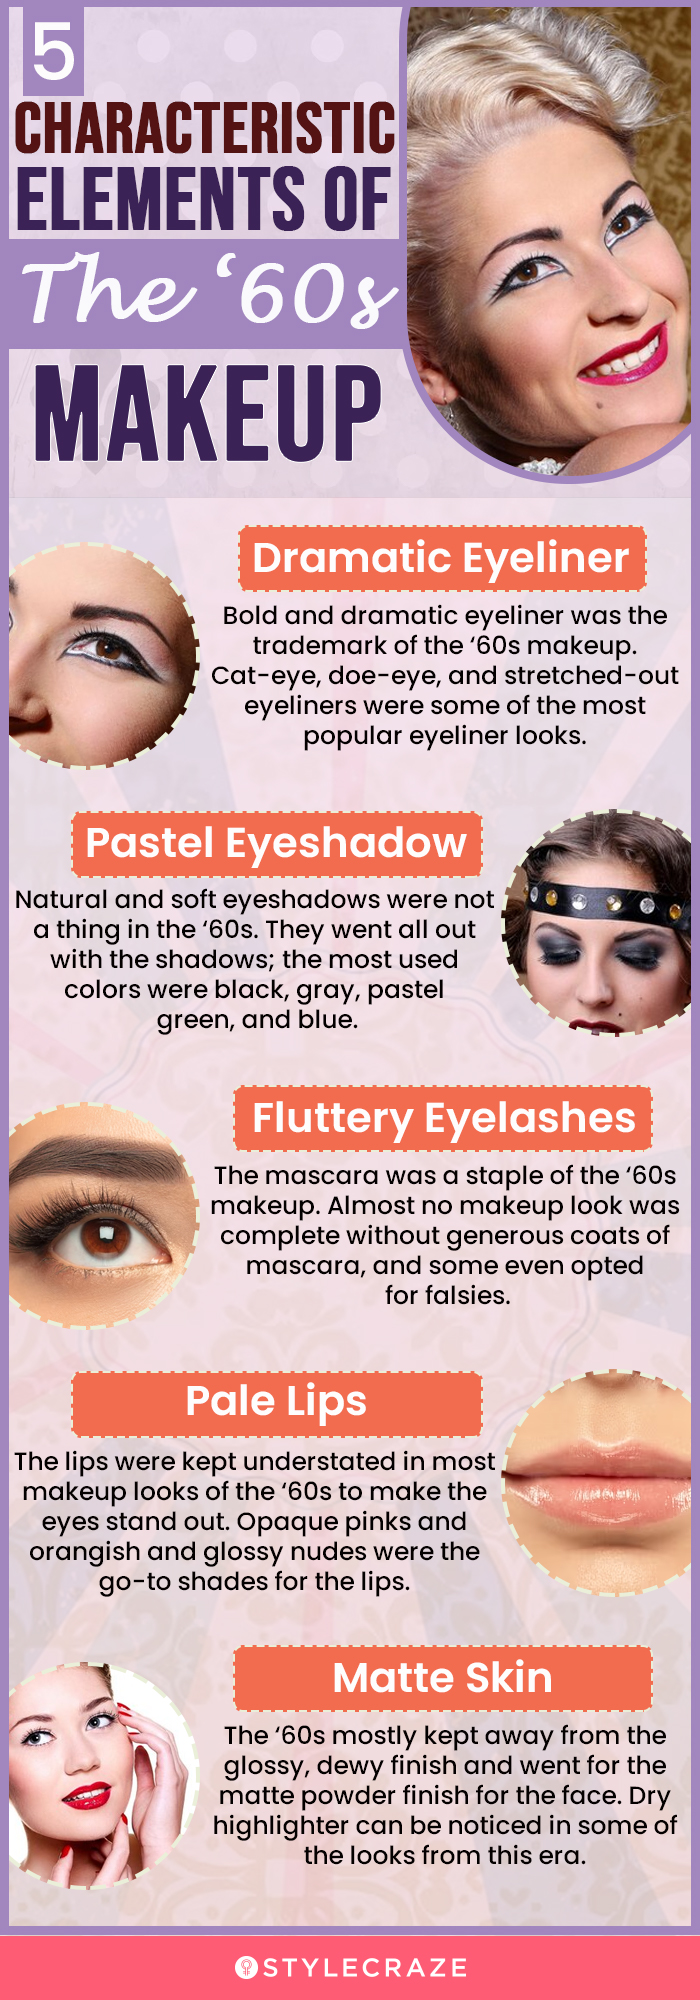 5 characteristic elements of the ‘60s makeup (infographic)